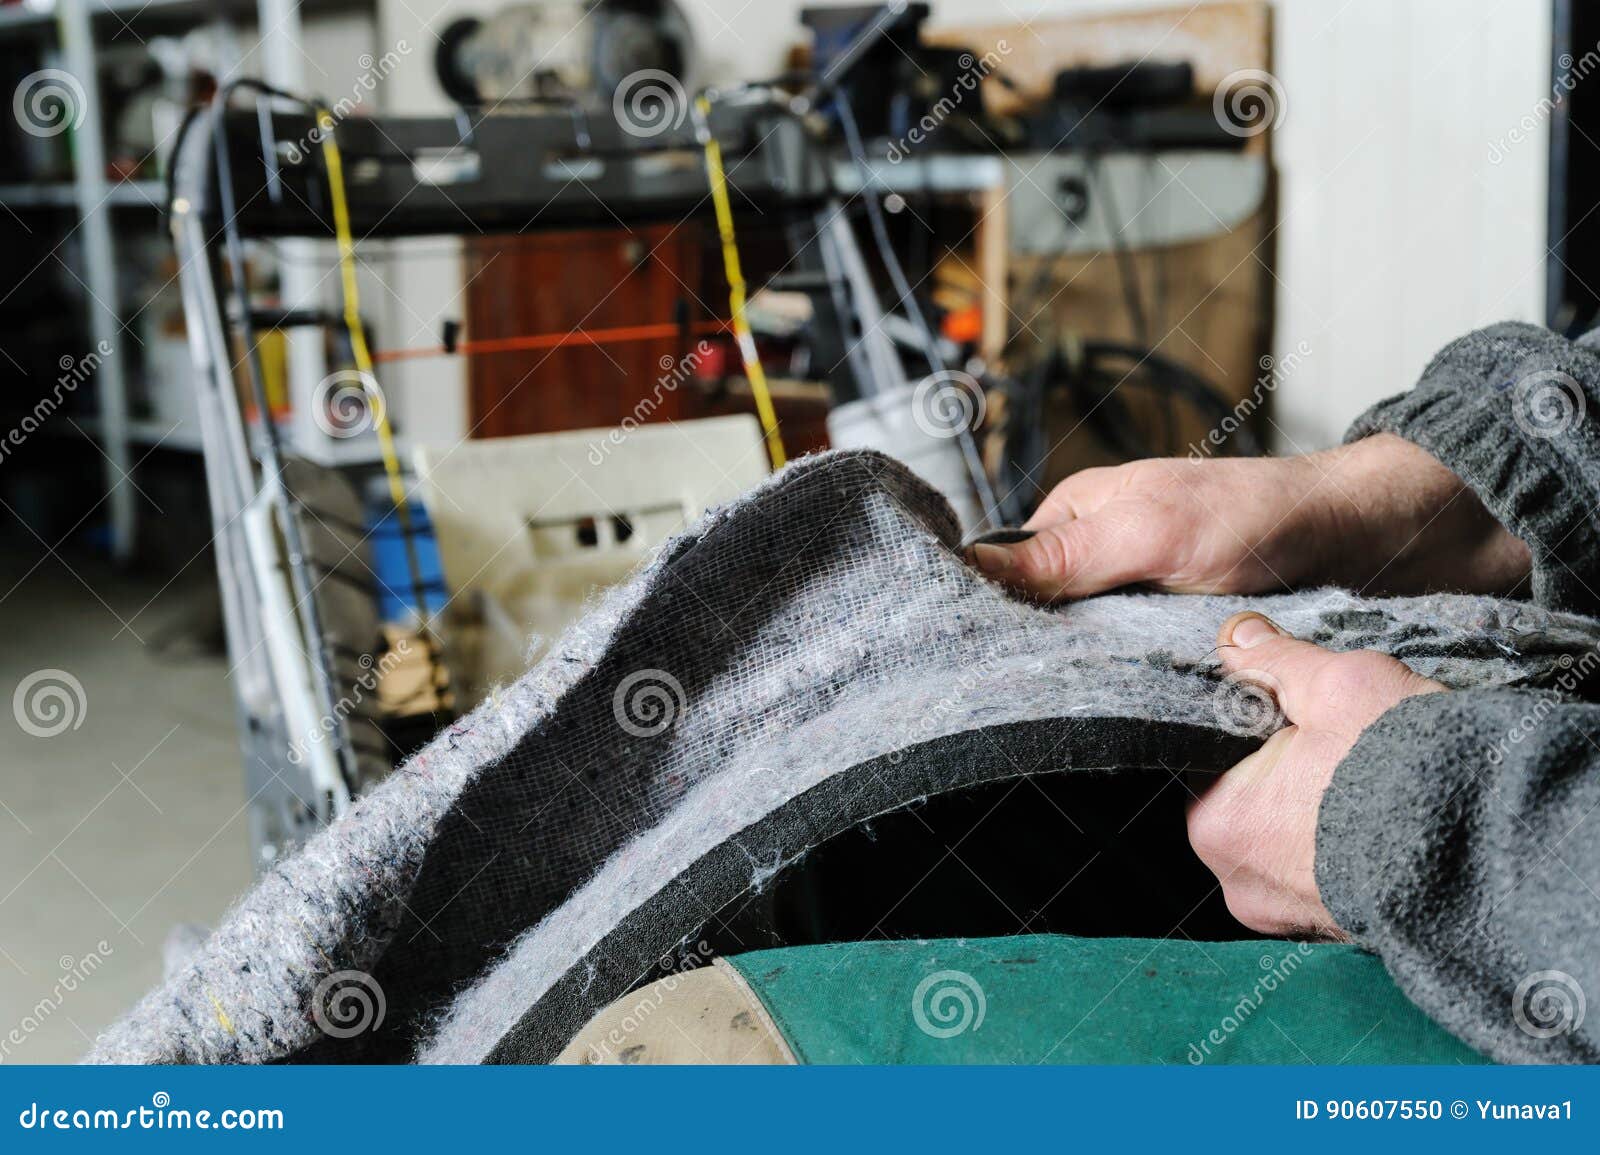 Repair of Car Seat Heating. Stock Photo - Image of cable, chair: 90607550